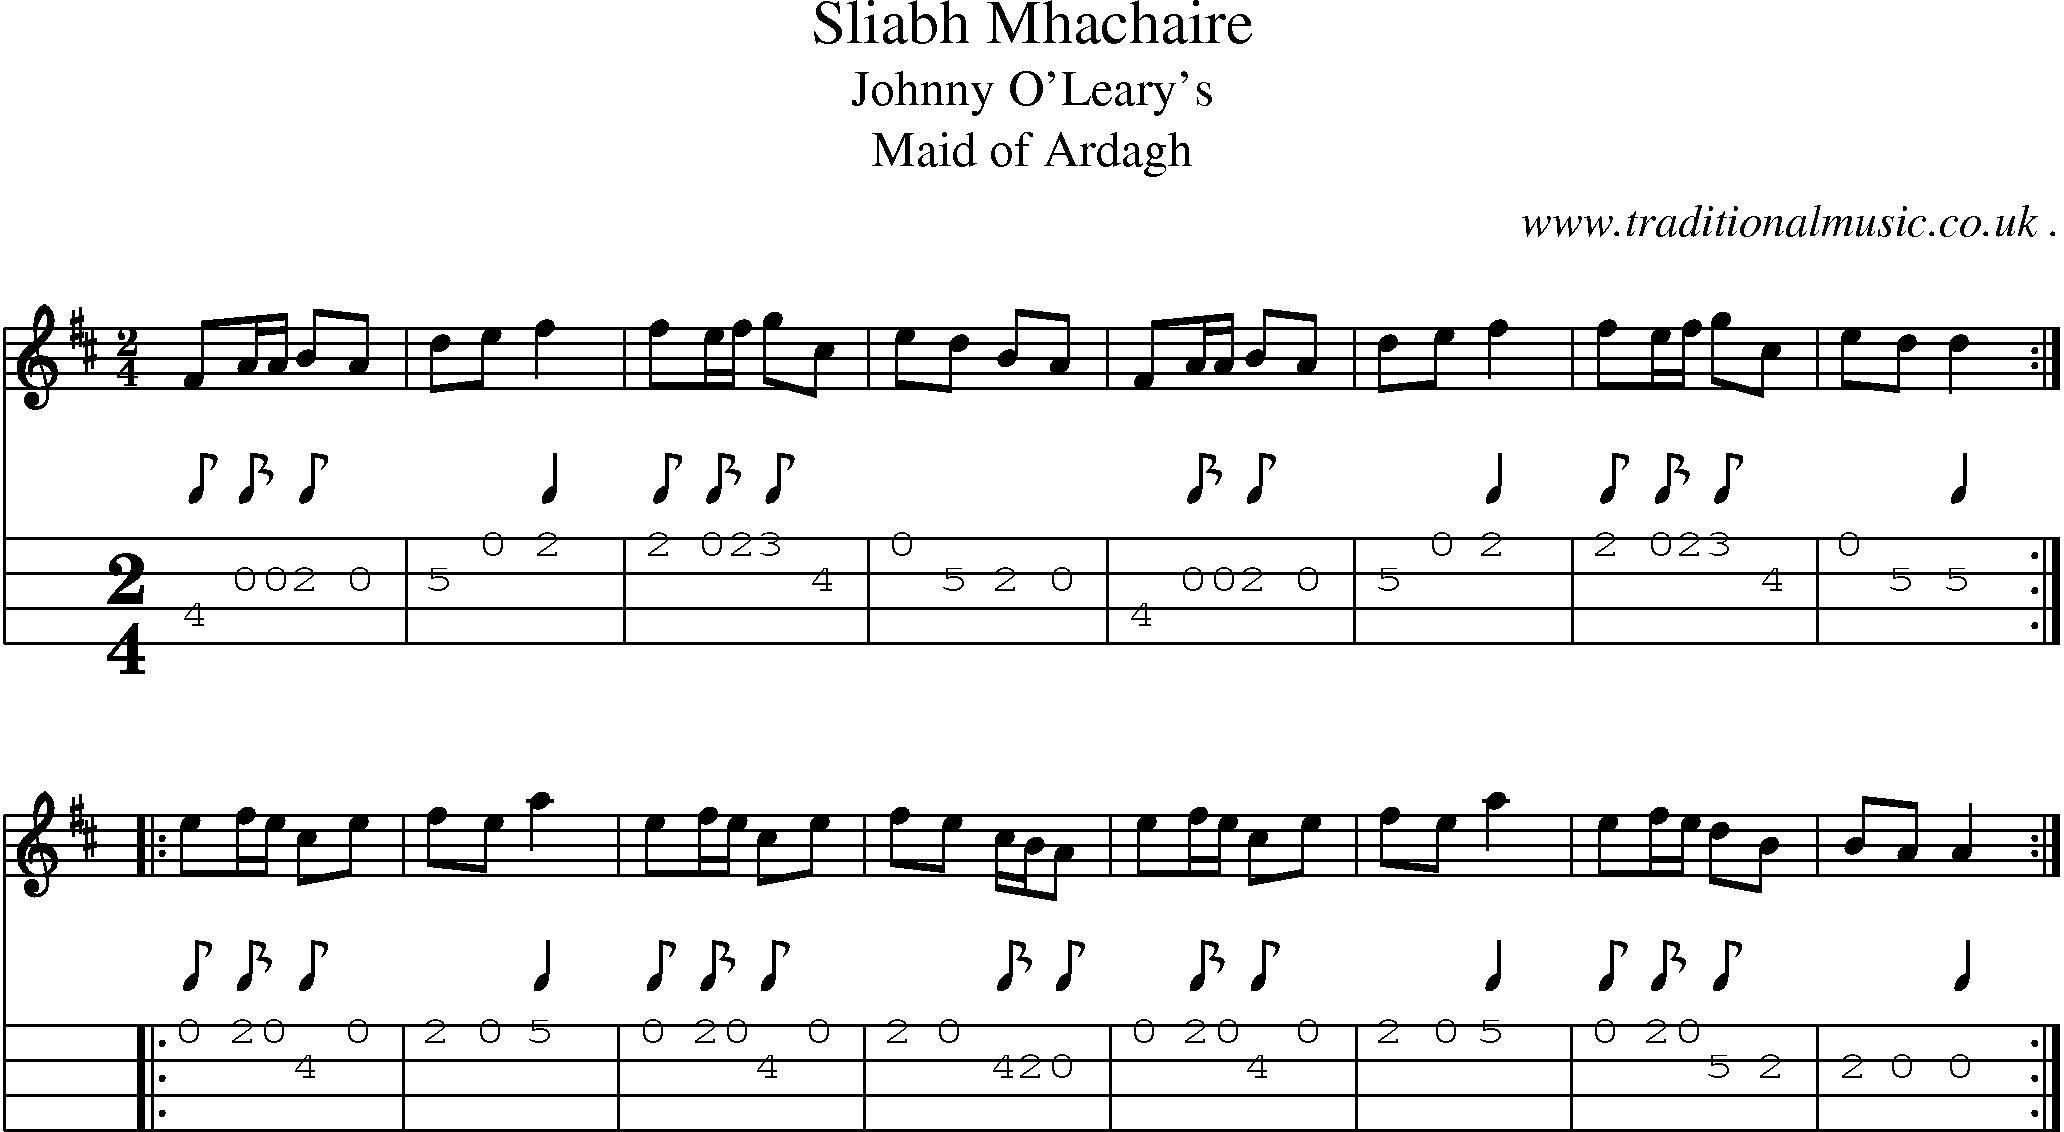 Sheet-Music and Mandolin Tabs for Sliabh Mhachaire